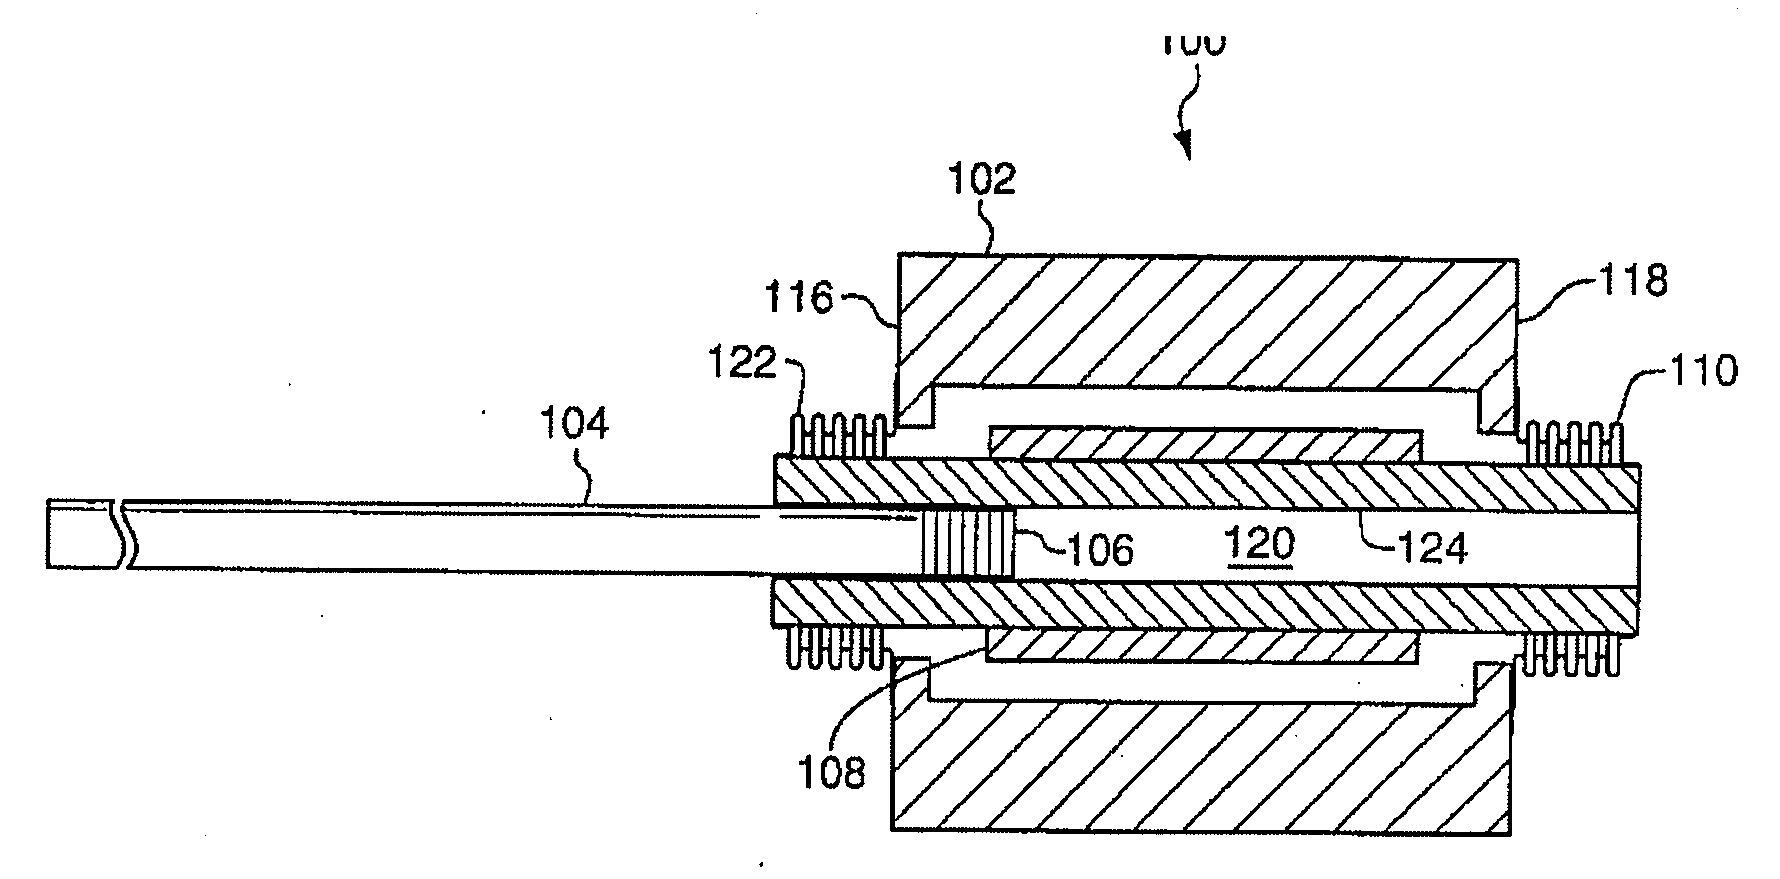 Implantable hearing aid transducer with advanceable actuator to faciliate coupling with the auditory system